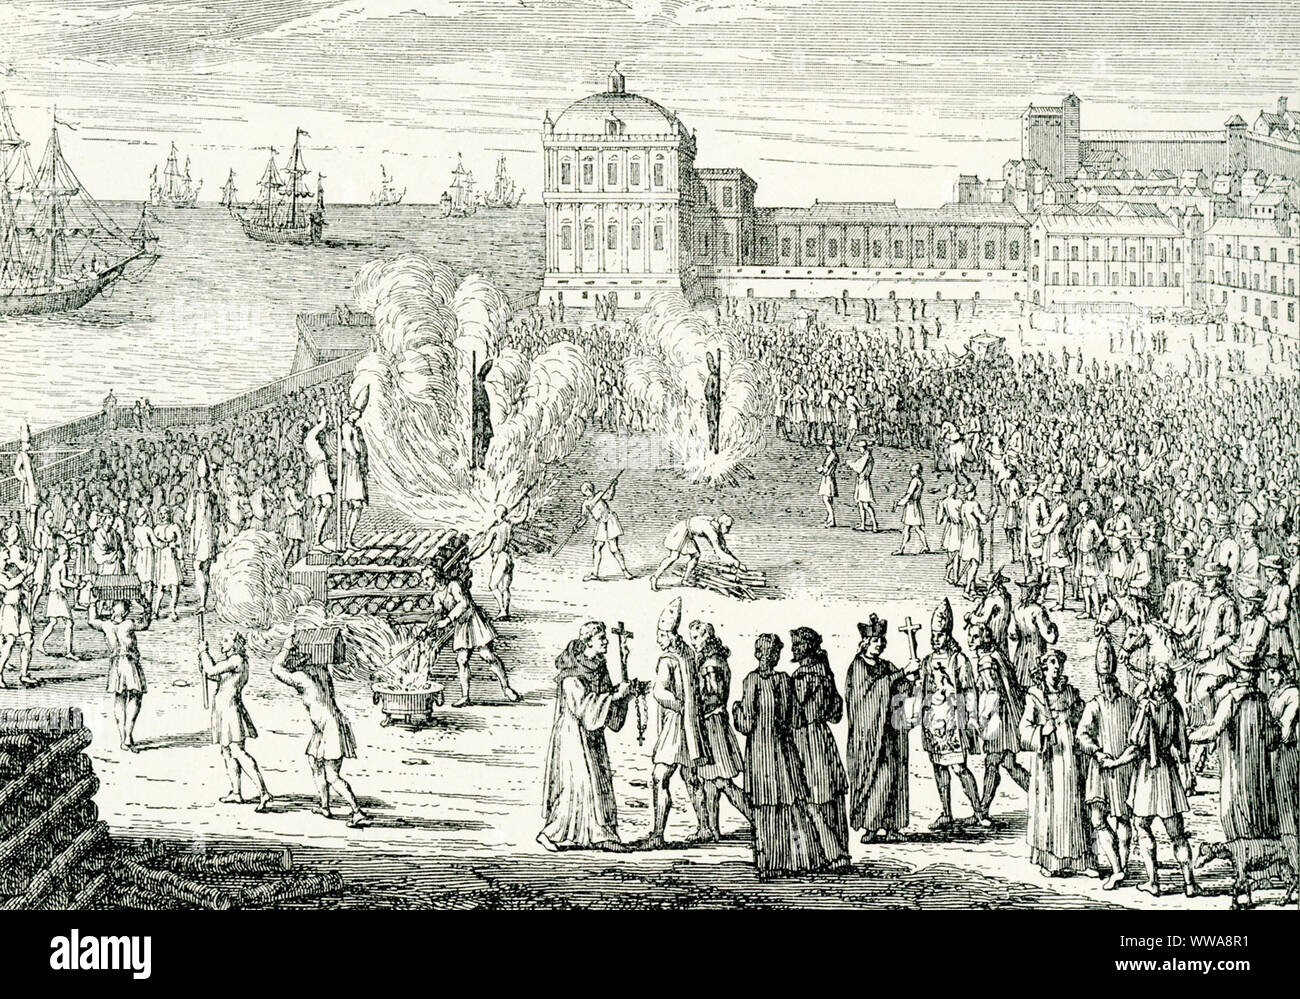 This illustration, from an old engraving, shows the burning of heretics during the Spanish Inquisition (established in 1478 and disbanded in 1834). The label notes that it illustrates an Auto da fe, the ritual of public penance of condemned heretics and apostates. This illustration shows burnings in the 1500s. Stock Photo